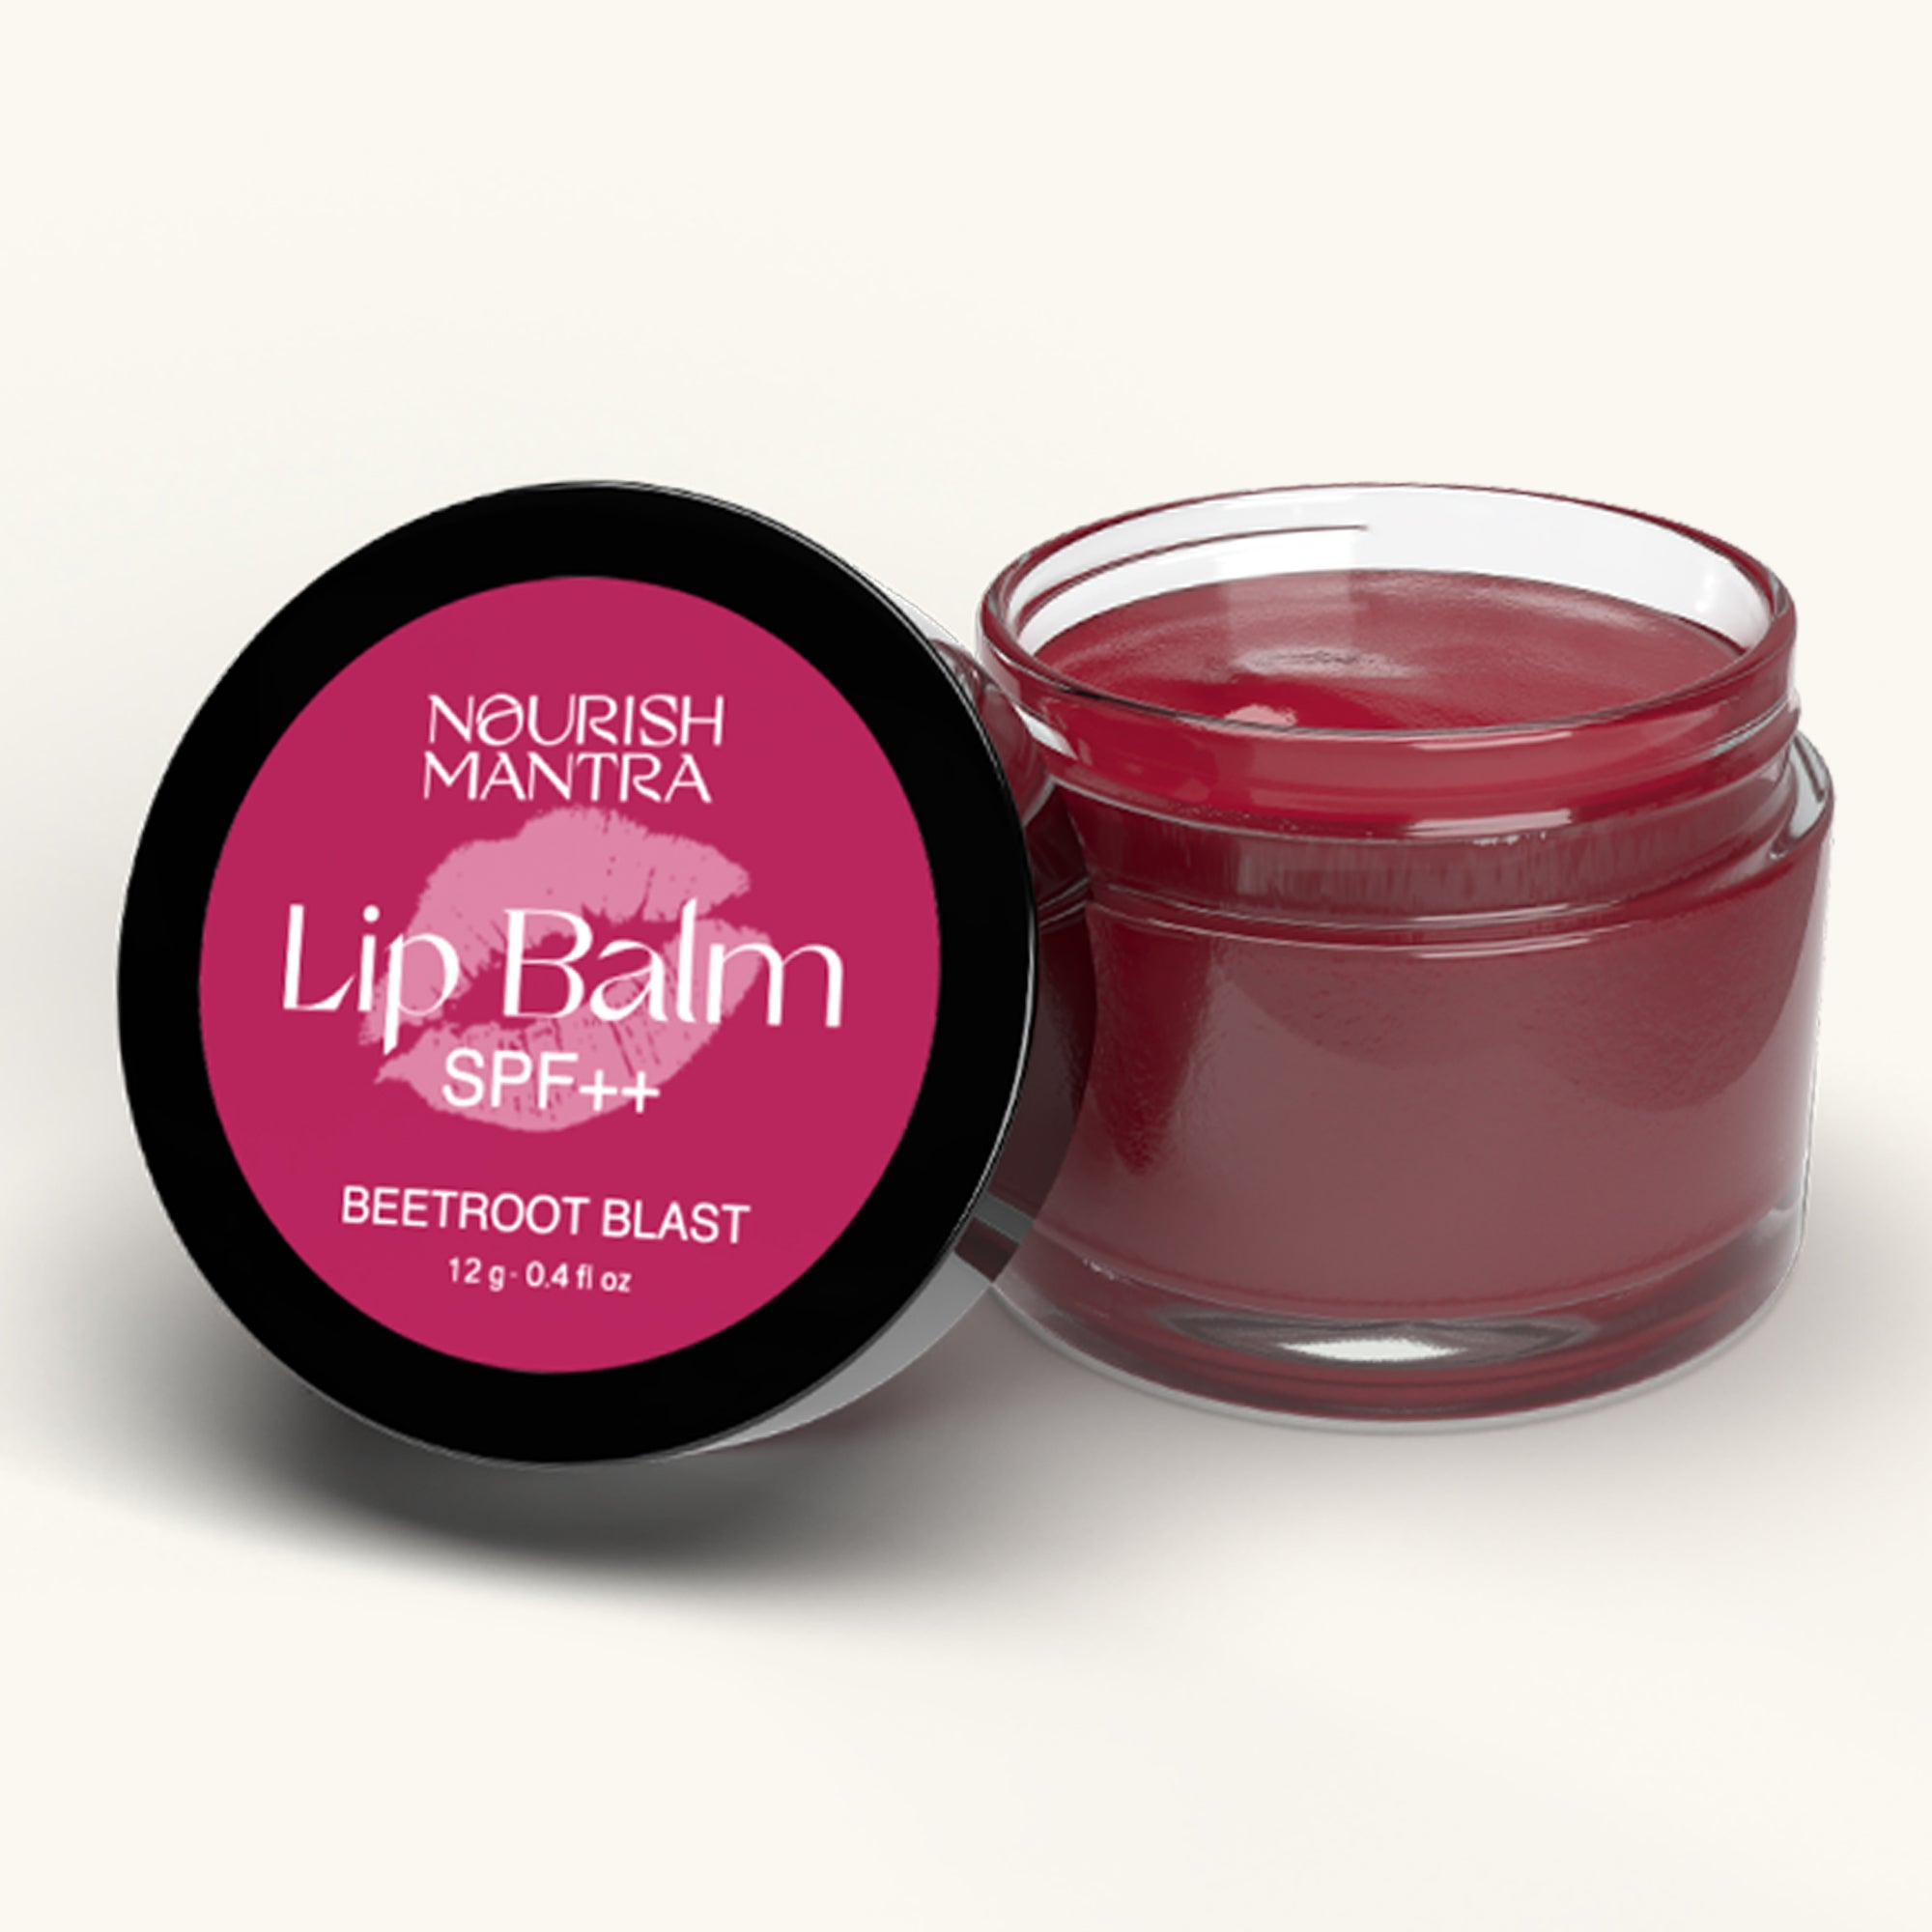 Beetroot Blast Lip Balm for Dry Chapped Lips